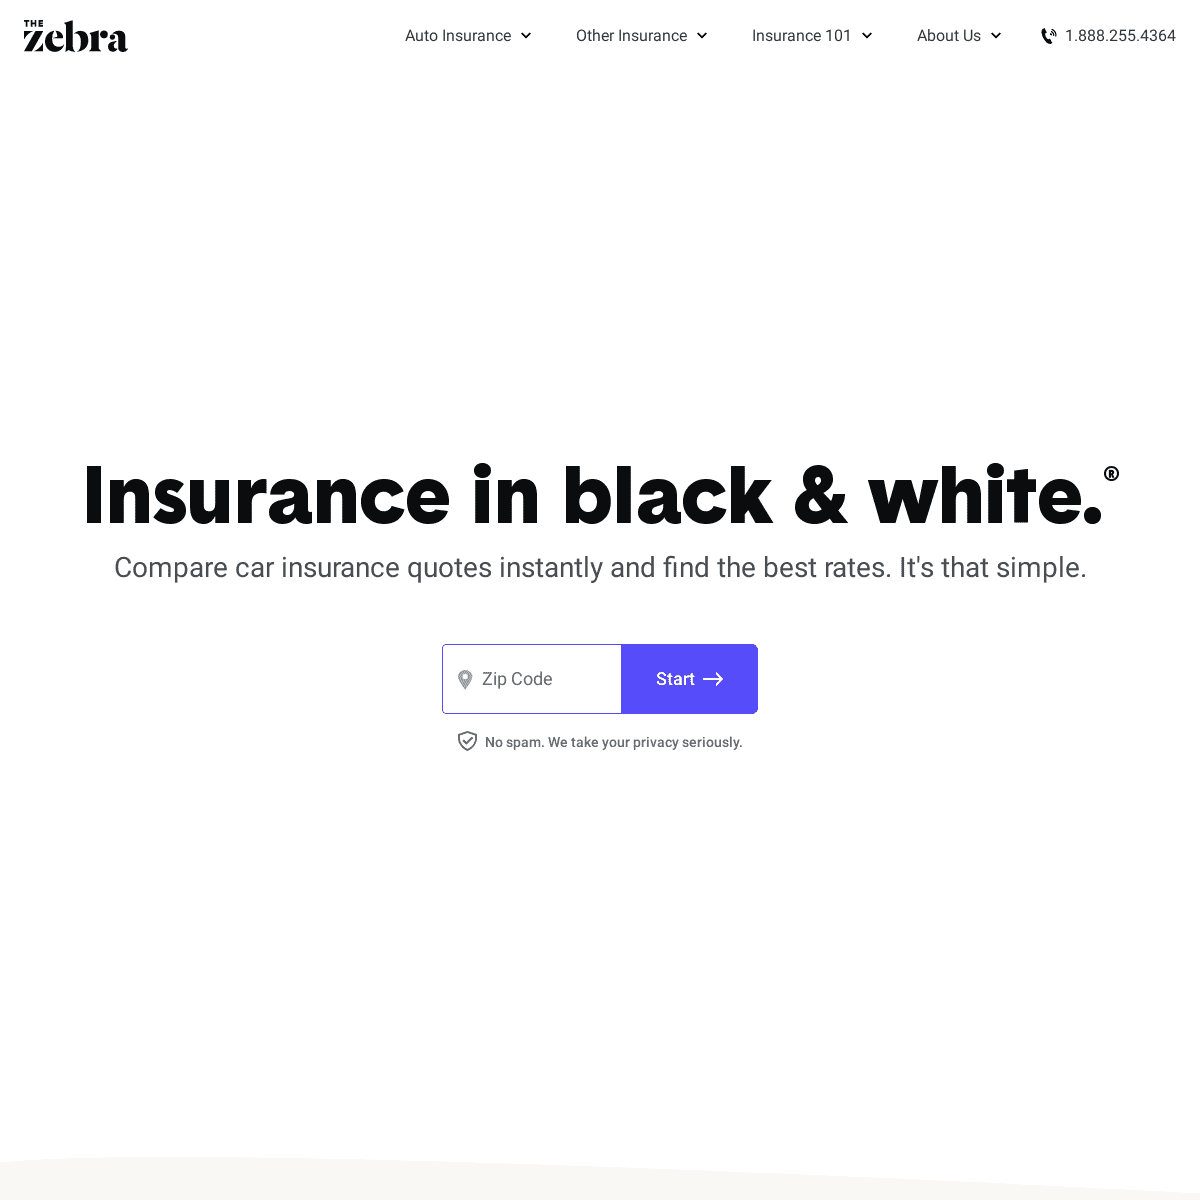 Compare Car Insurance Quotes: Fast, Free, Simple | The Zebra